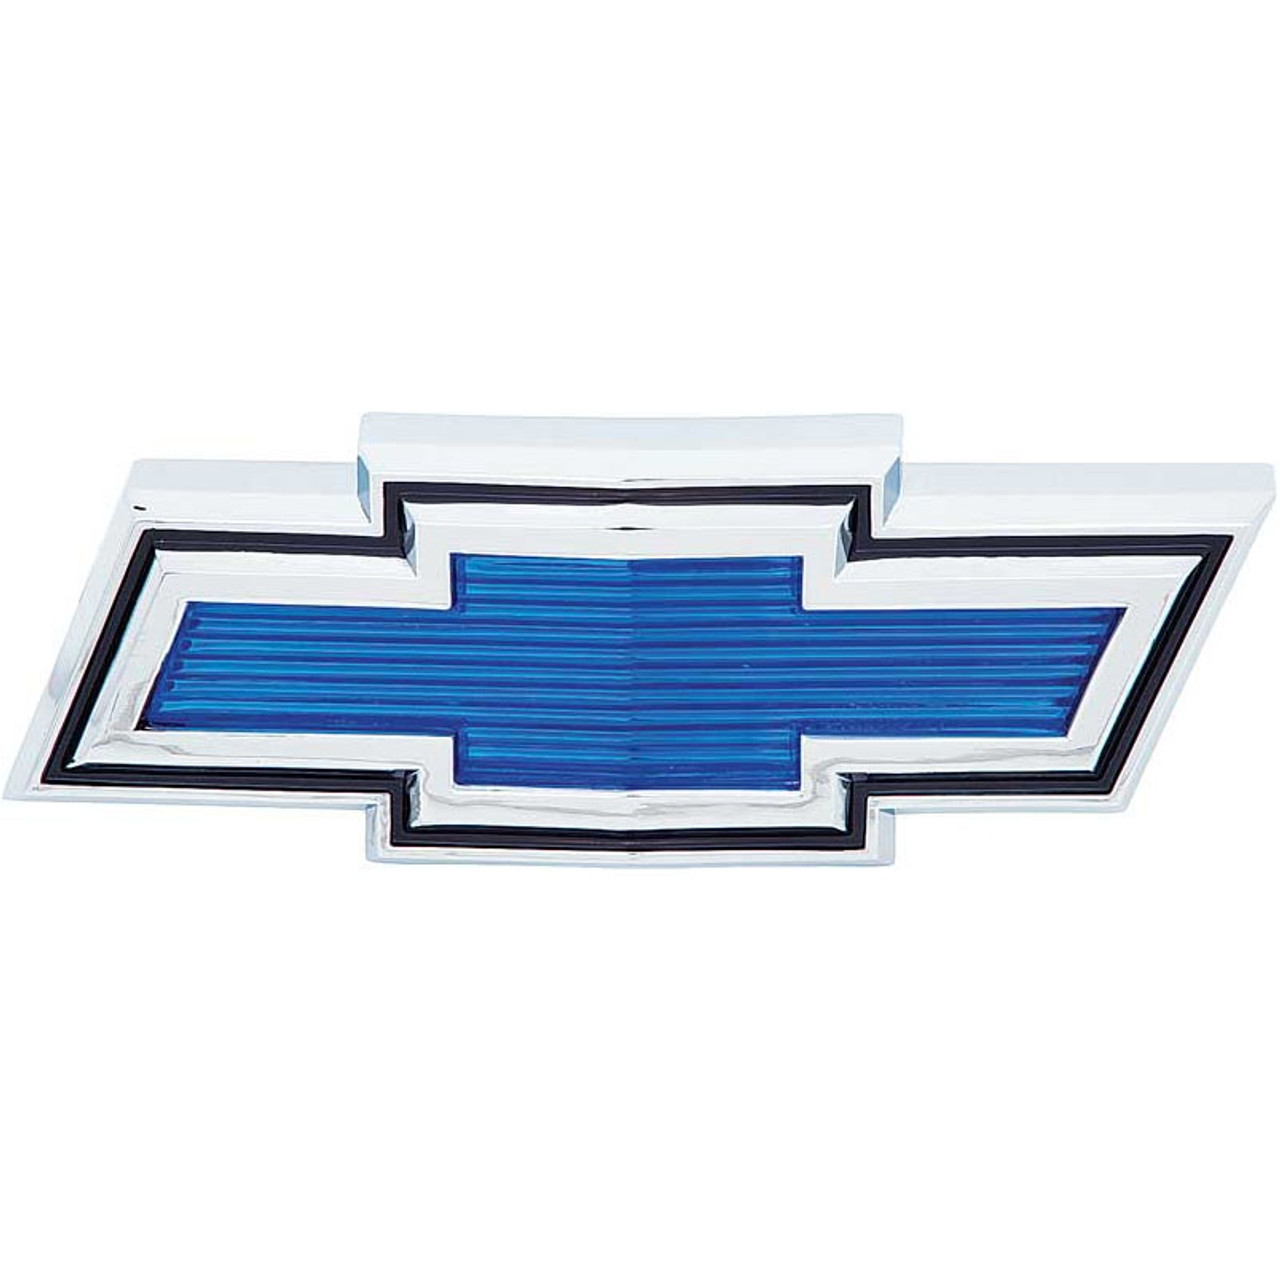 1971-1972 Chevy Truck Grill Emblem Chrome with Blue Bow-Tie, With Hardware